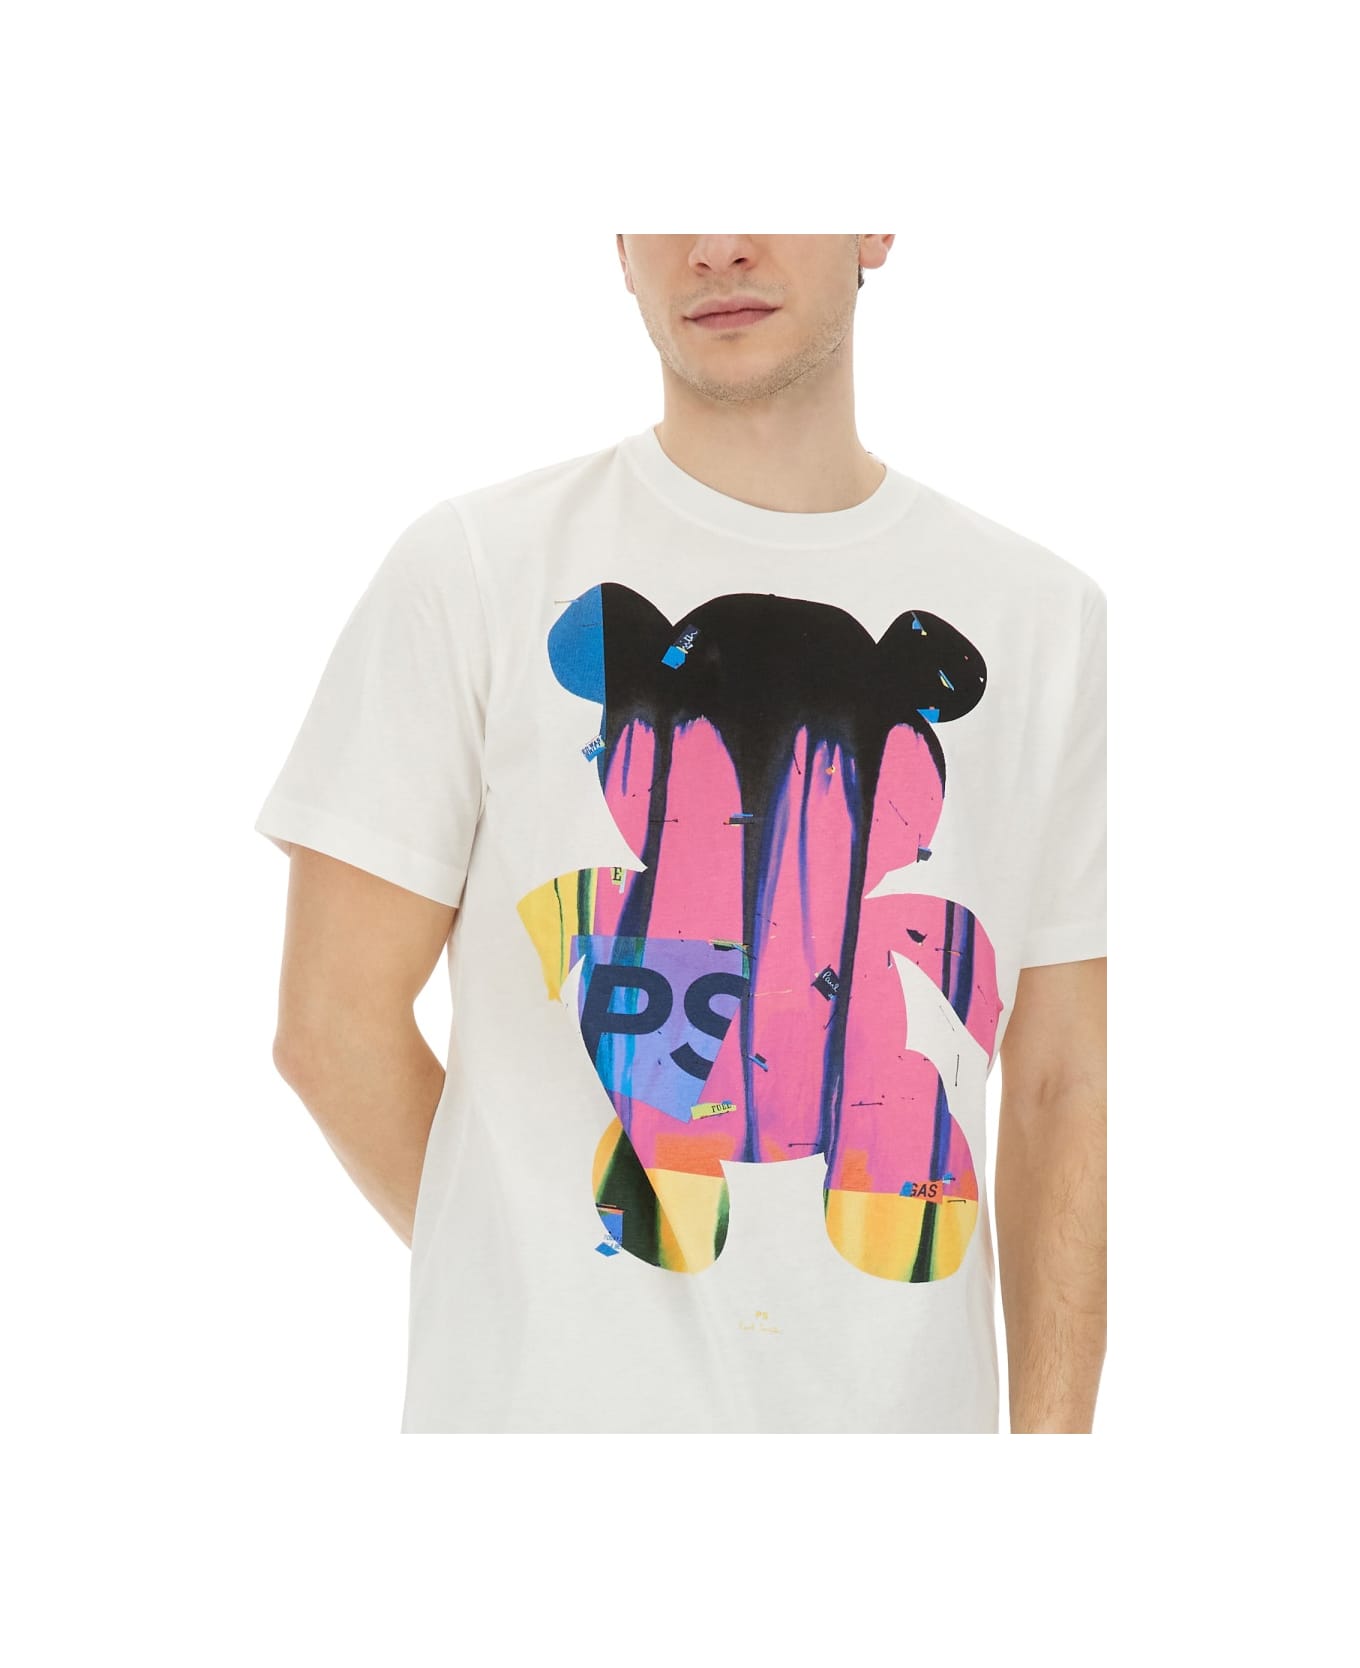 PS by Paul Smith "teddy" T-shirt - WHITE シャツ